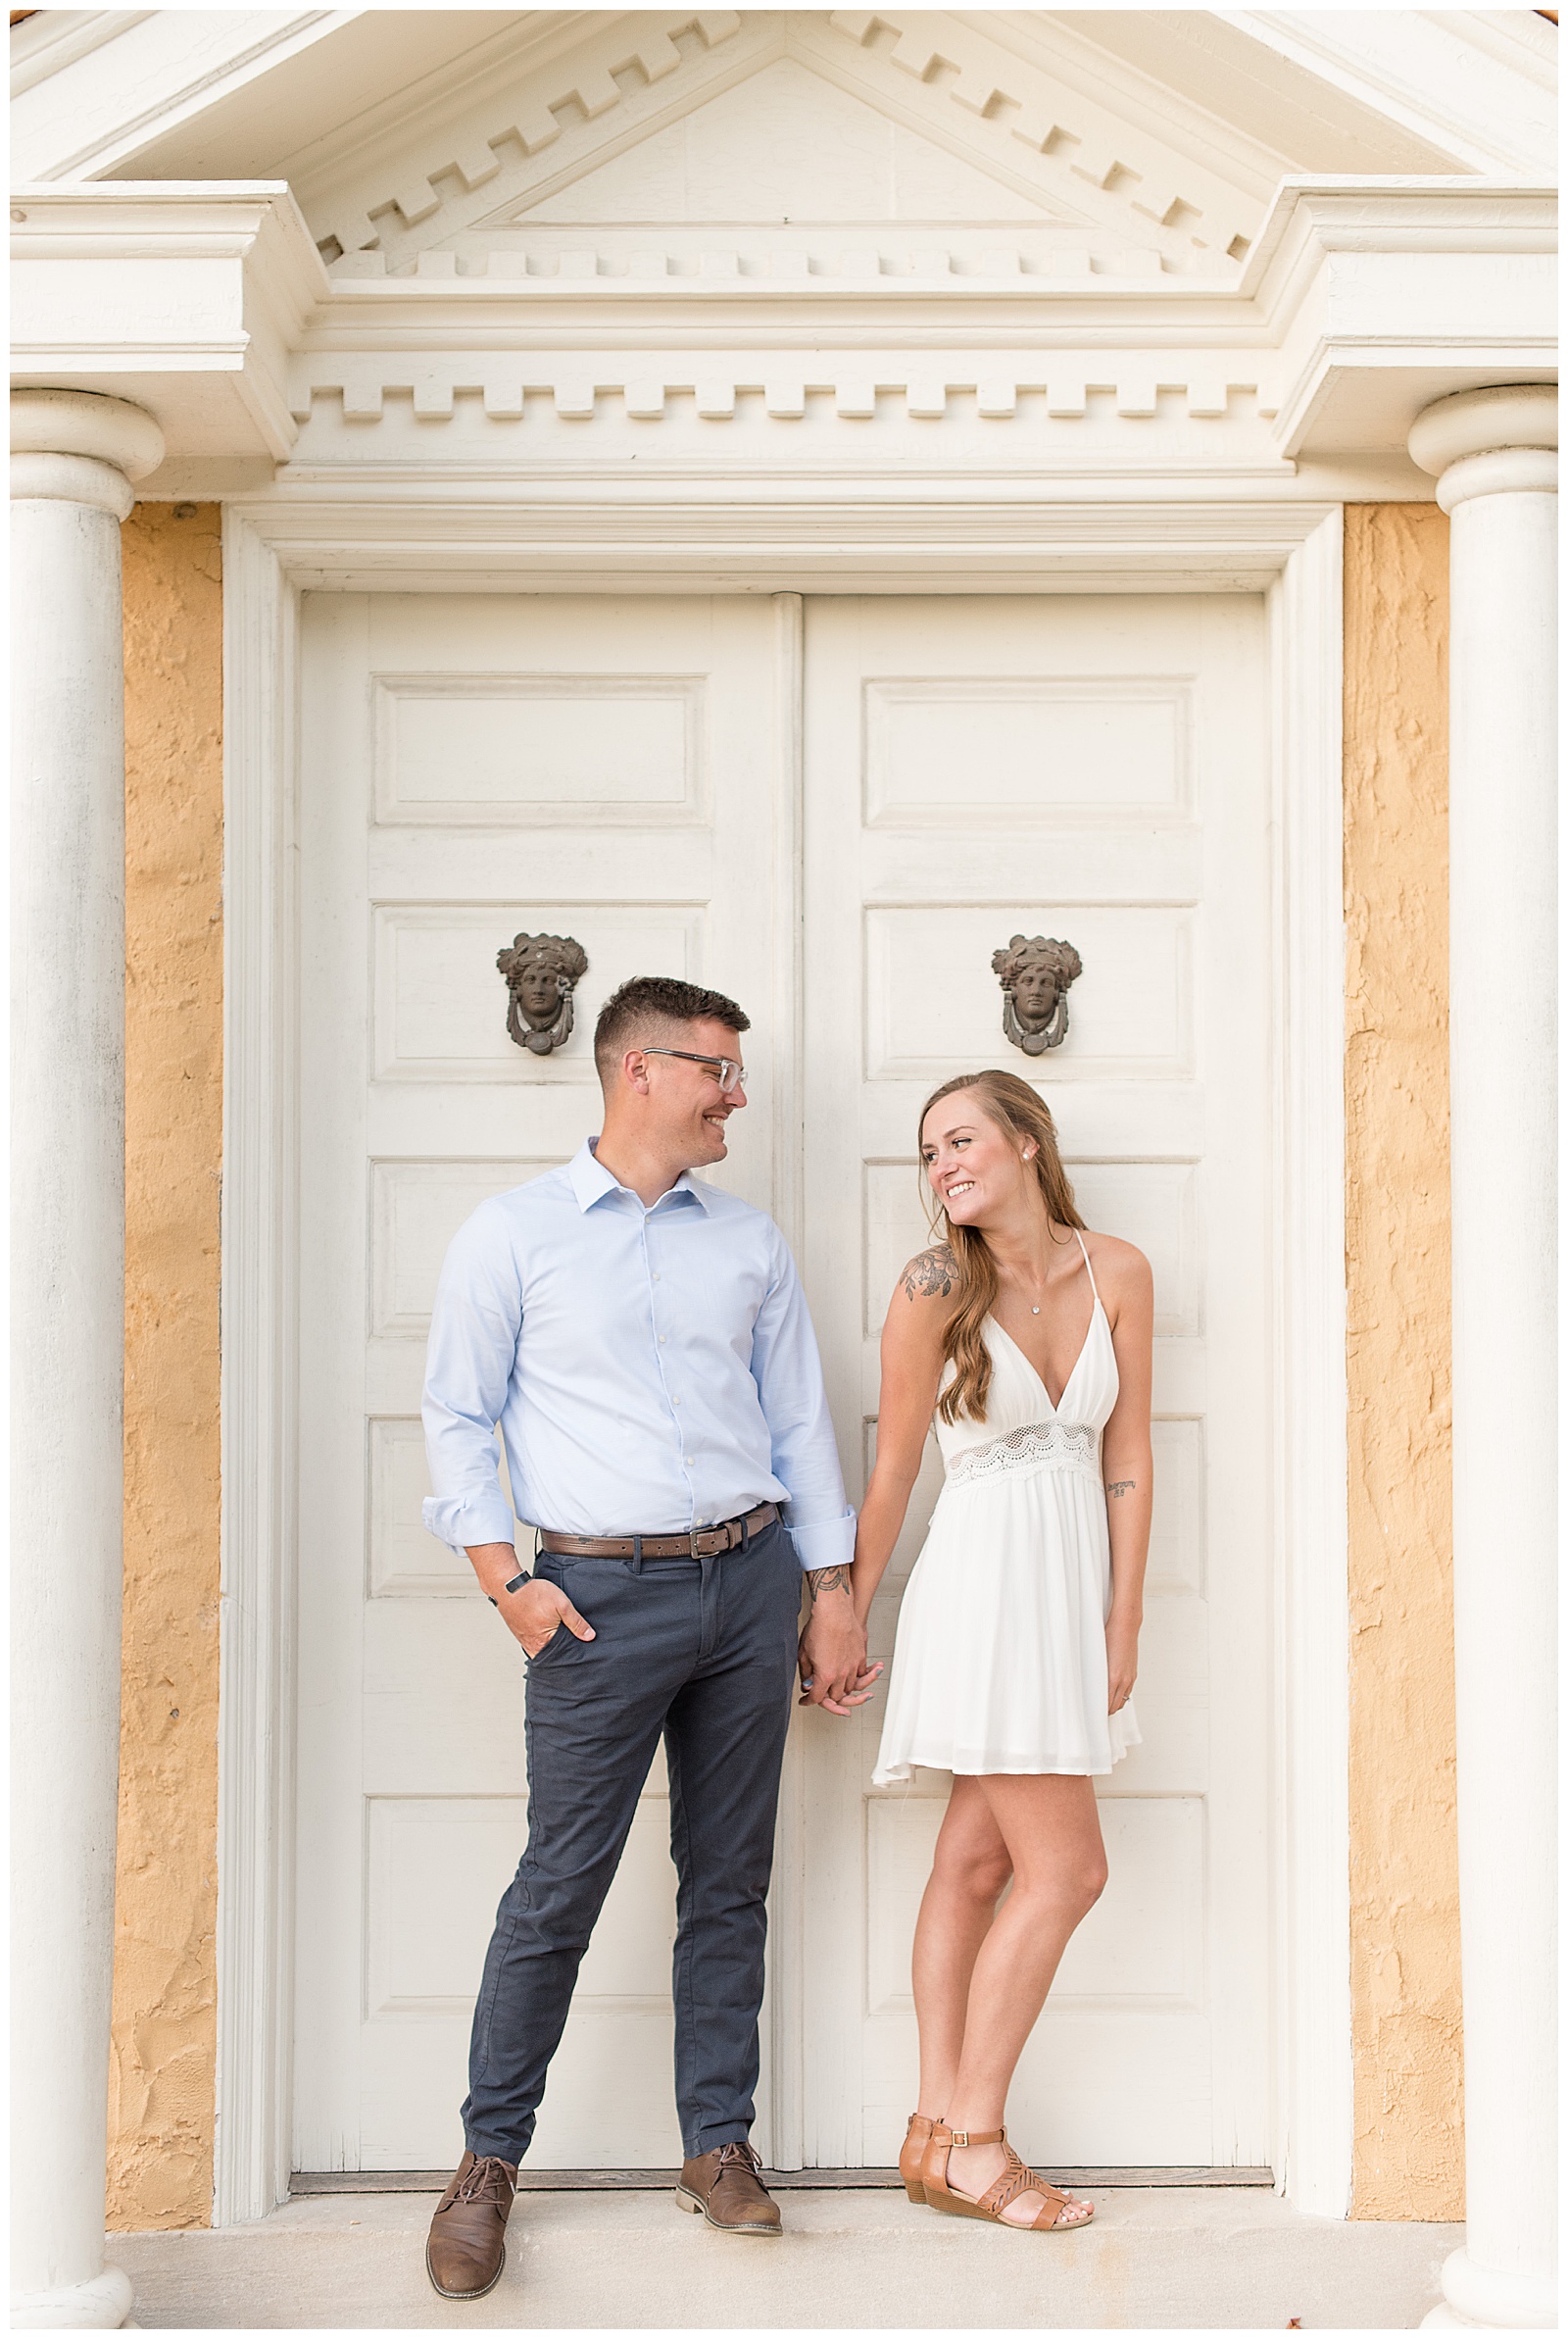 couple is standing in front of white doors of peach colored building and the guy is on the left with his right hand in his pocket and the girl is on the right with her left hand by her side and they are holding hands in the middle while looking at each other and smiling at Hibernia County Park in Chester County, PA